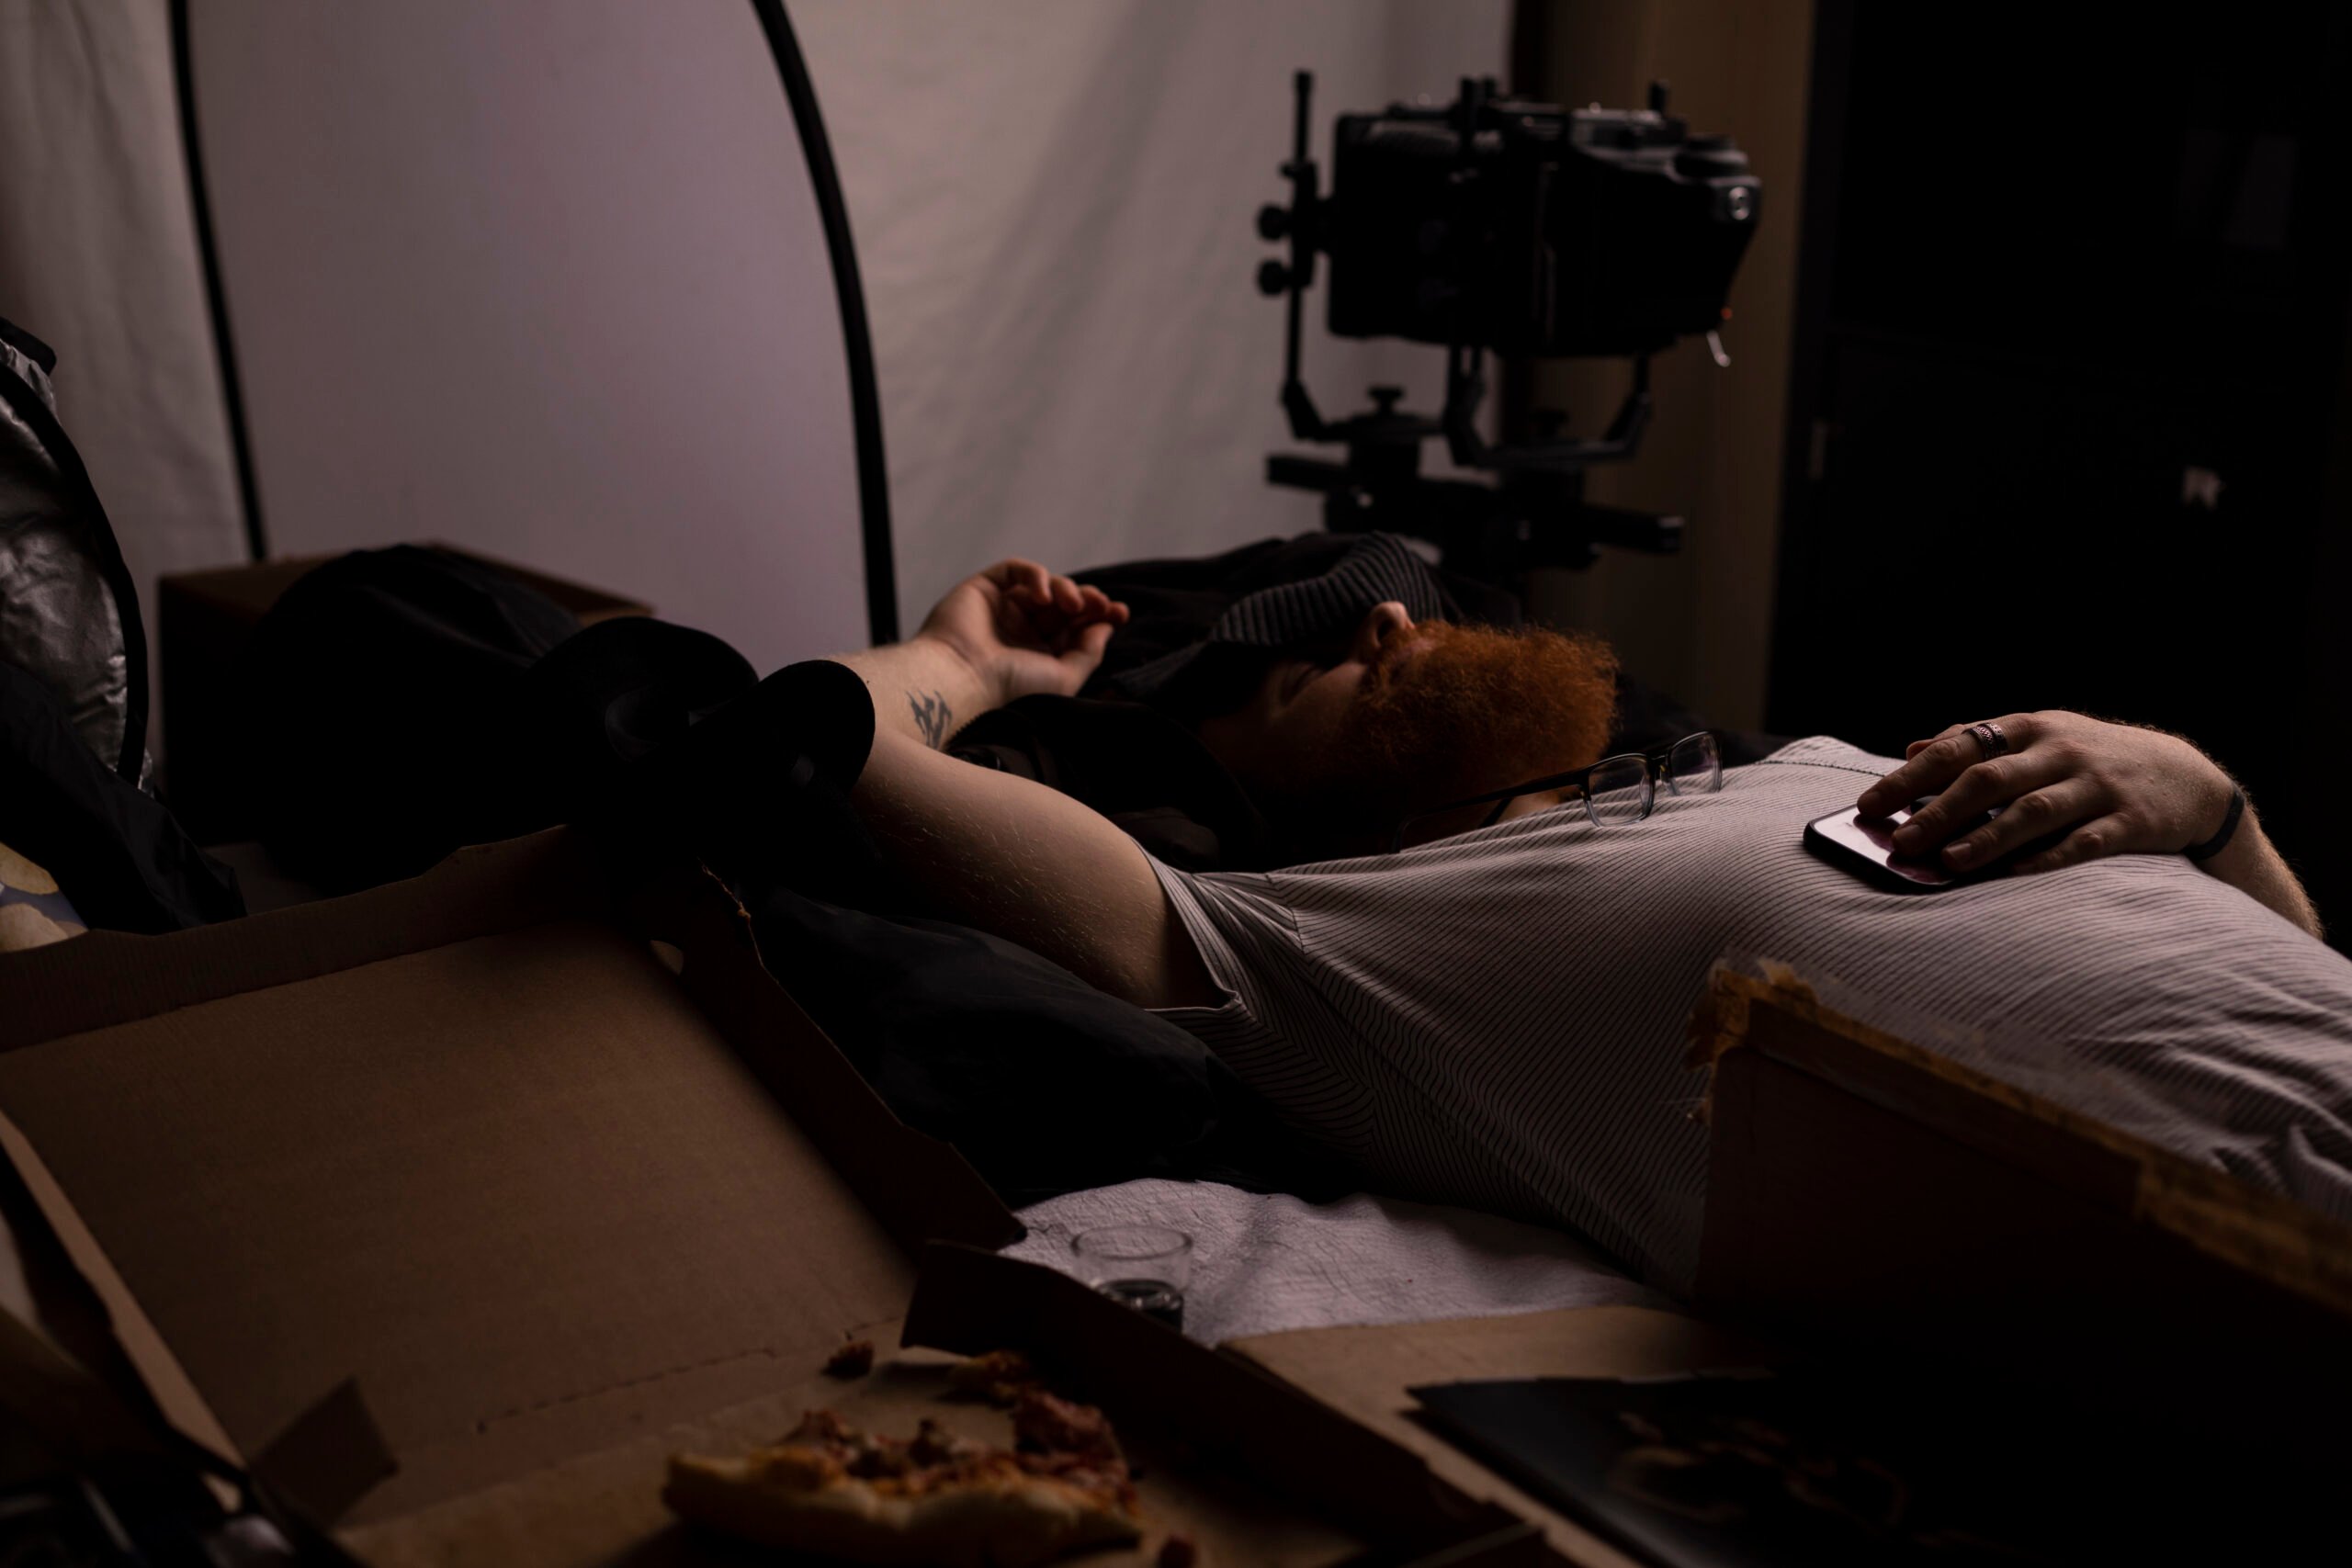 Behind the scenes shot of Eli as he takes a quick nap in between shoots